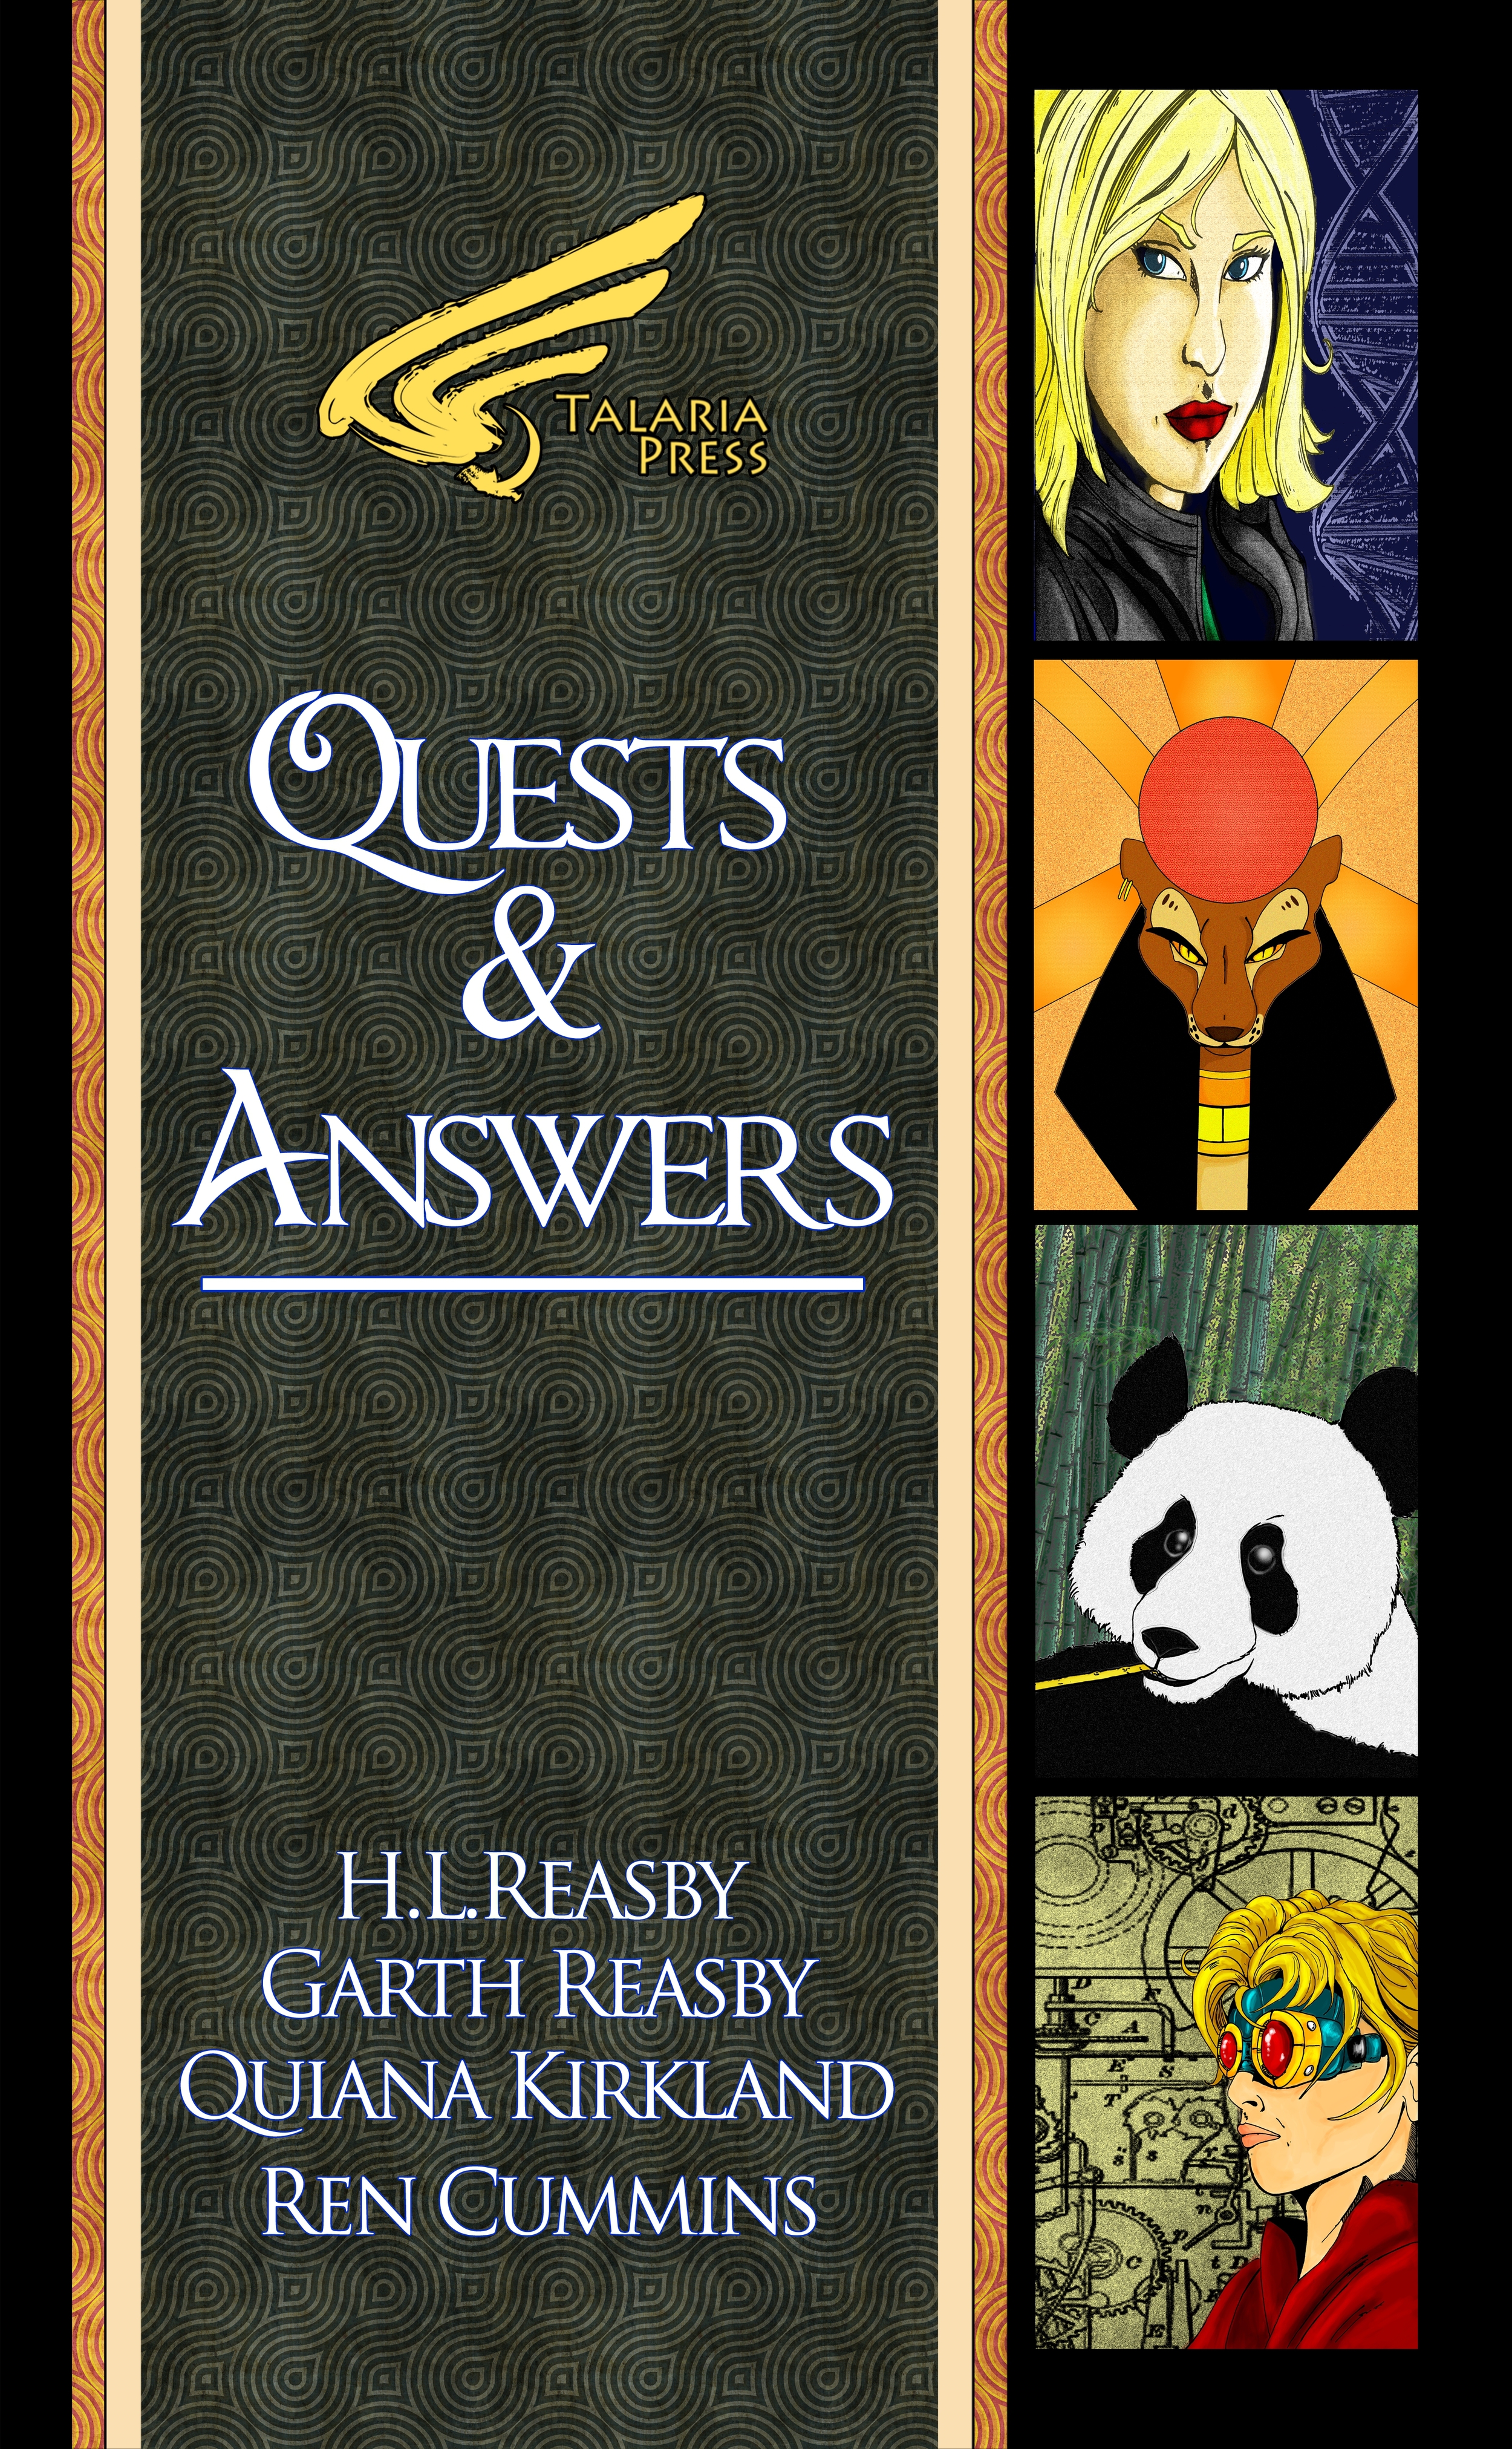 Quests & Answers